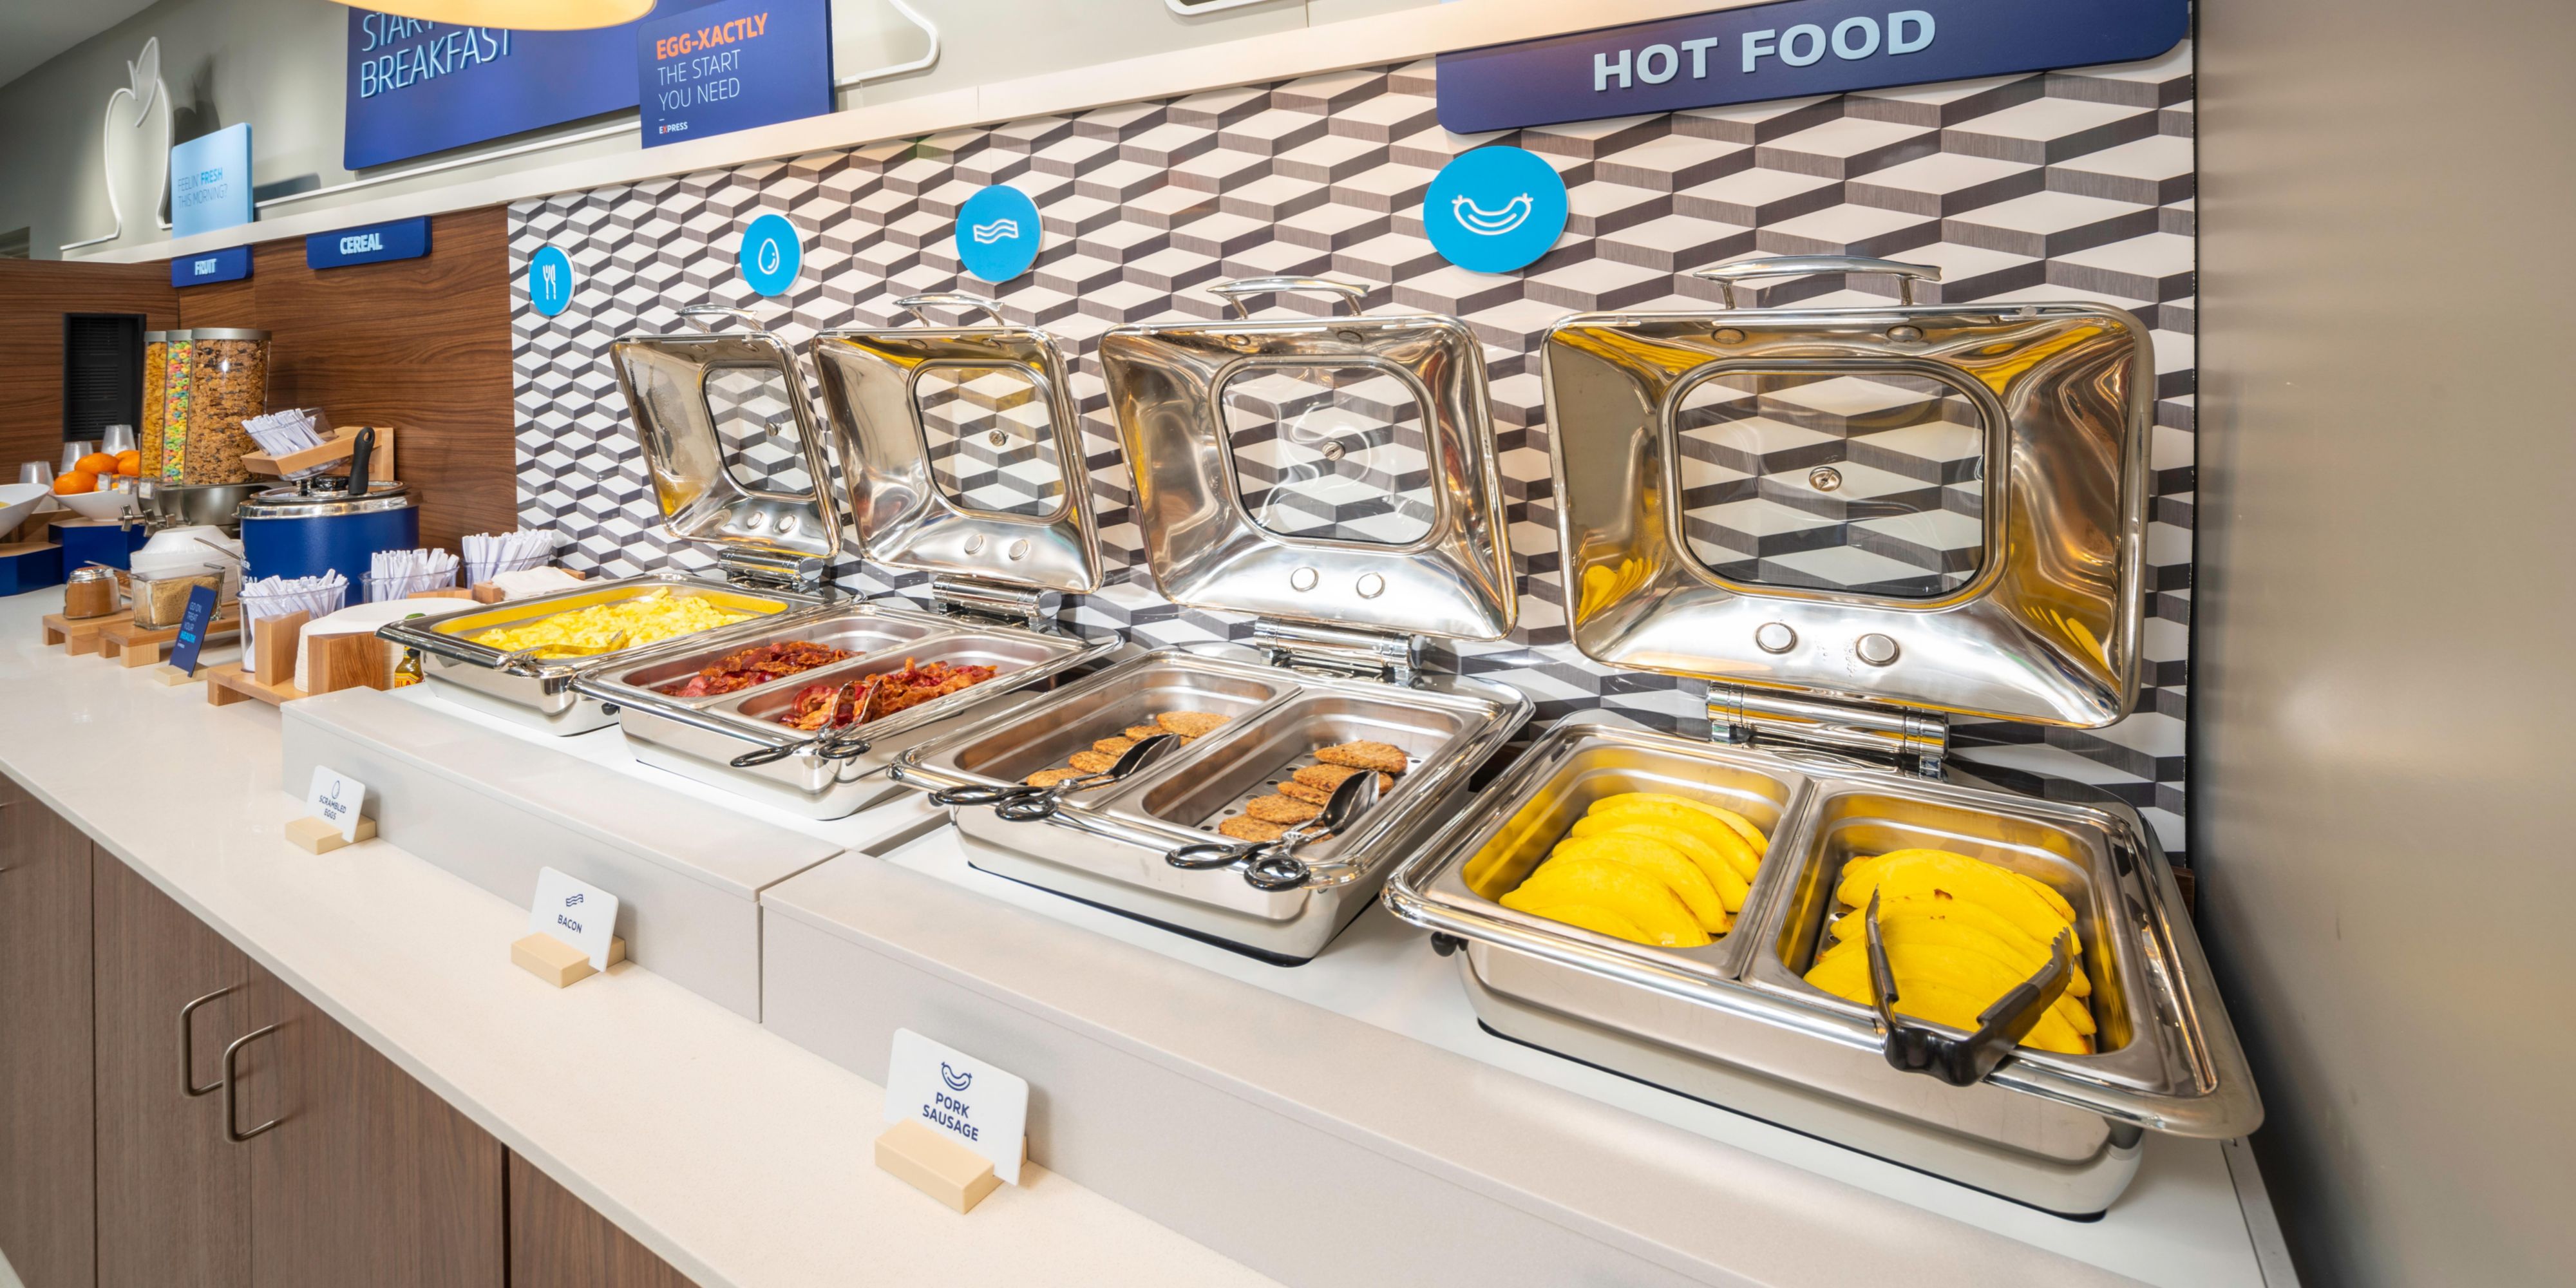 Wake up each morning and jump-start your stay at our Express Start Breakfast bar. You will find a full range of breakfast items including egg white omelets, Chobani yogurt, whole wheat English muffins, oatmeal, cereal and a one-touch pancake machine.